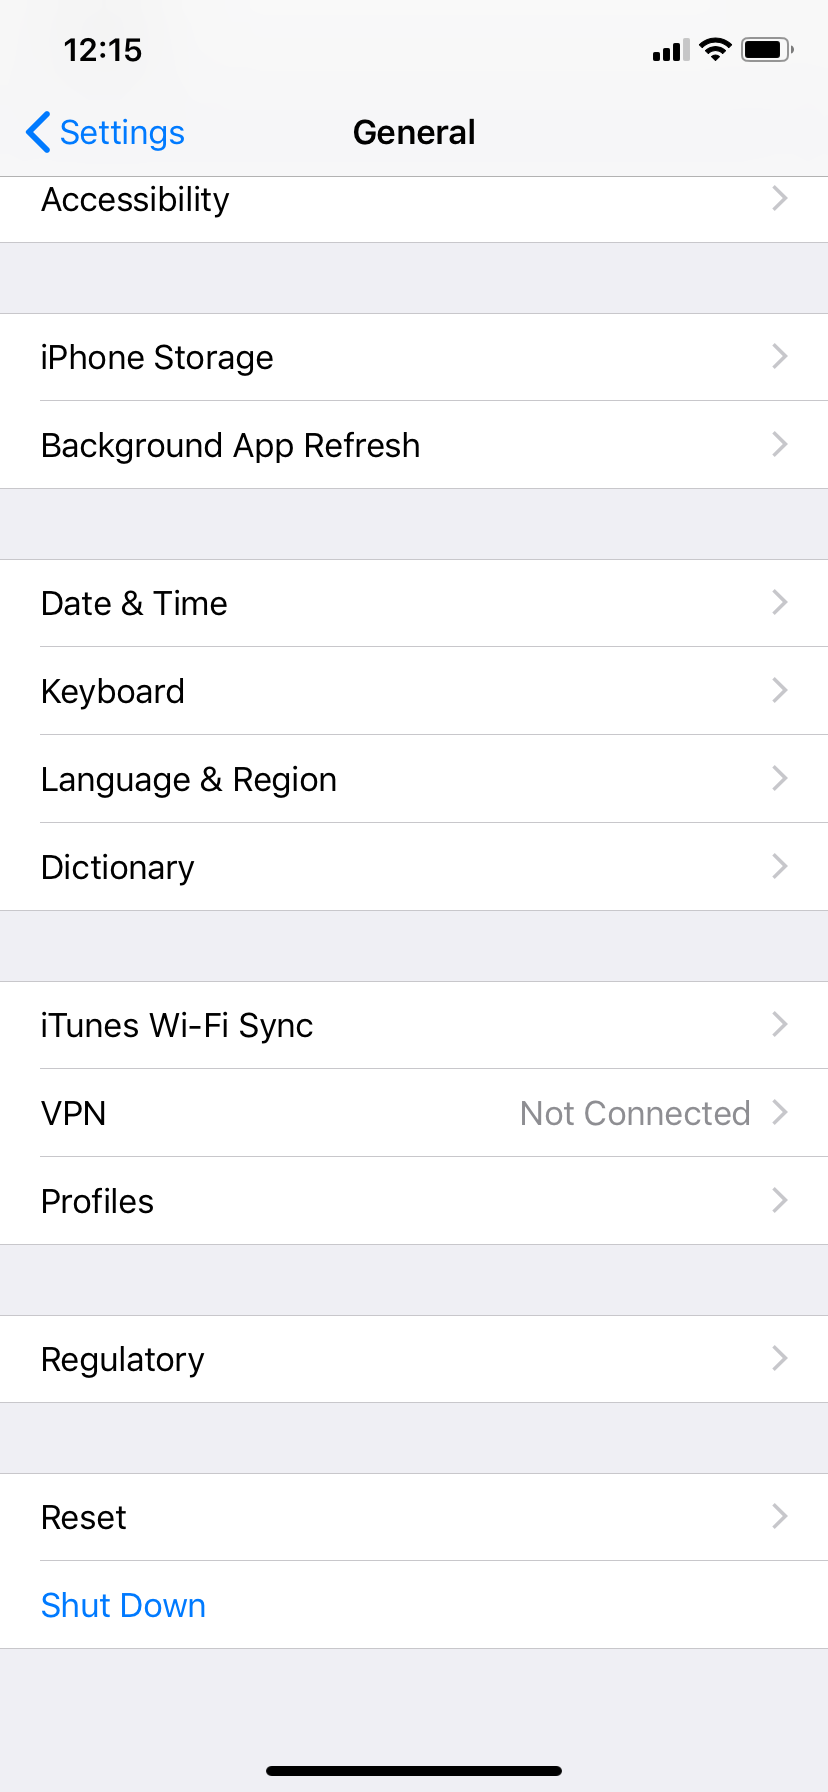 Resetting network settings on iPhone